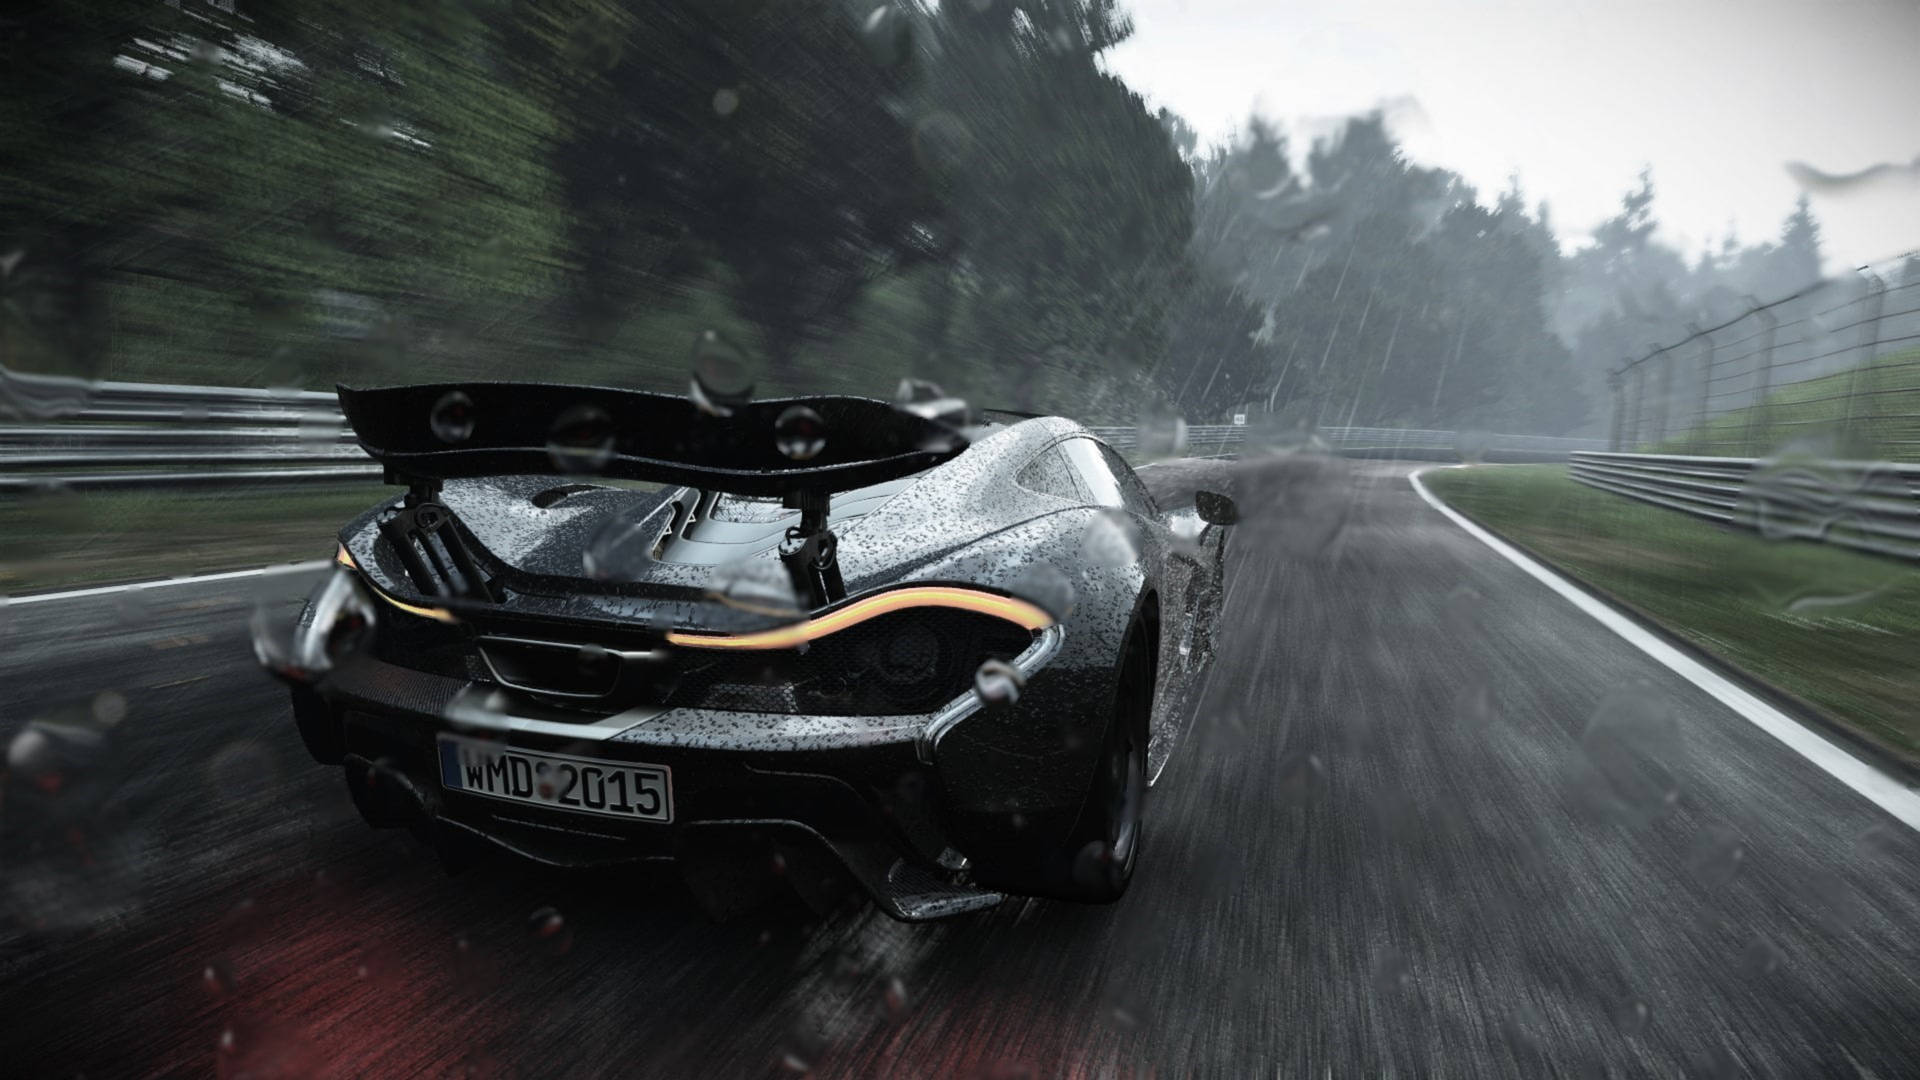 Stunning Mclaren P1 Gtr From Project Cars Game Background